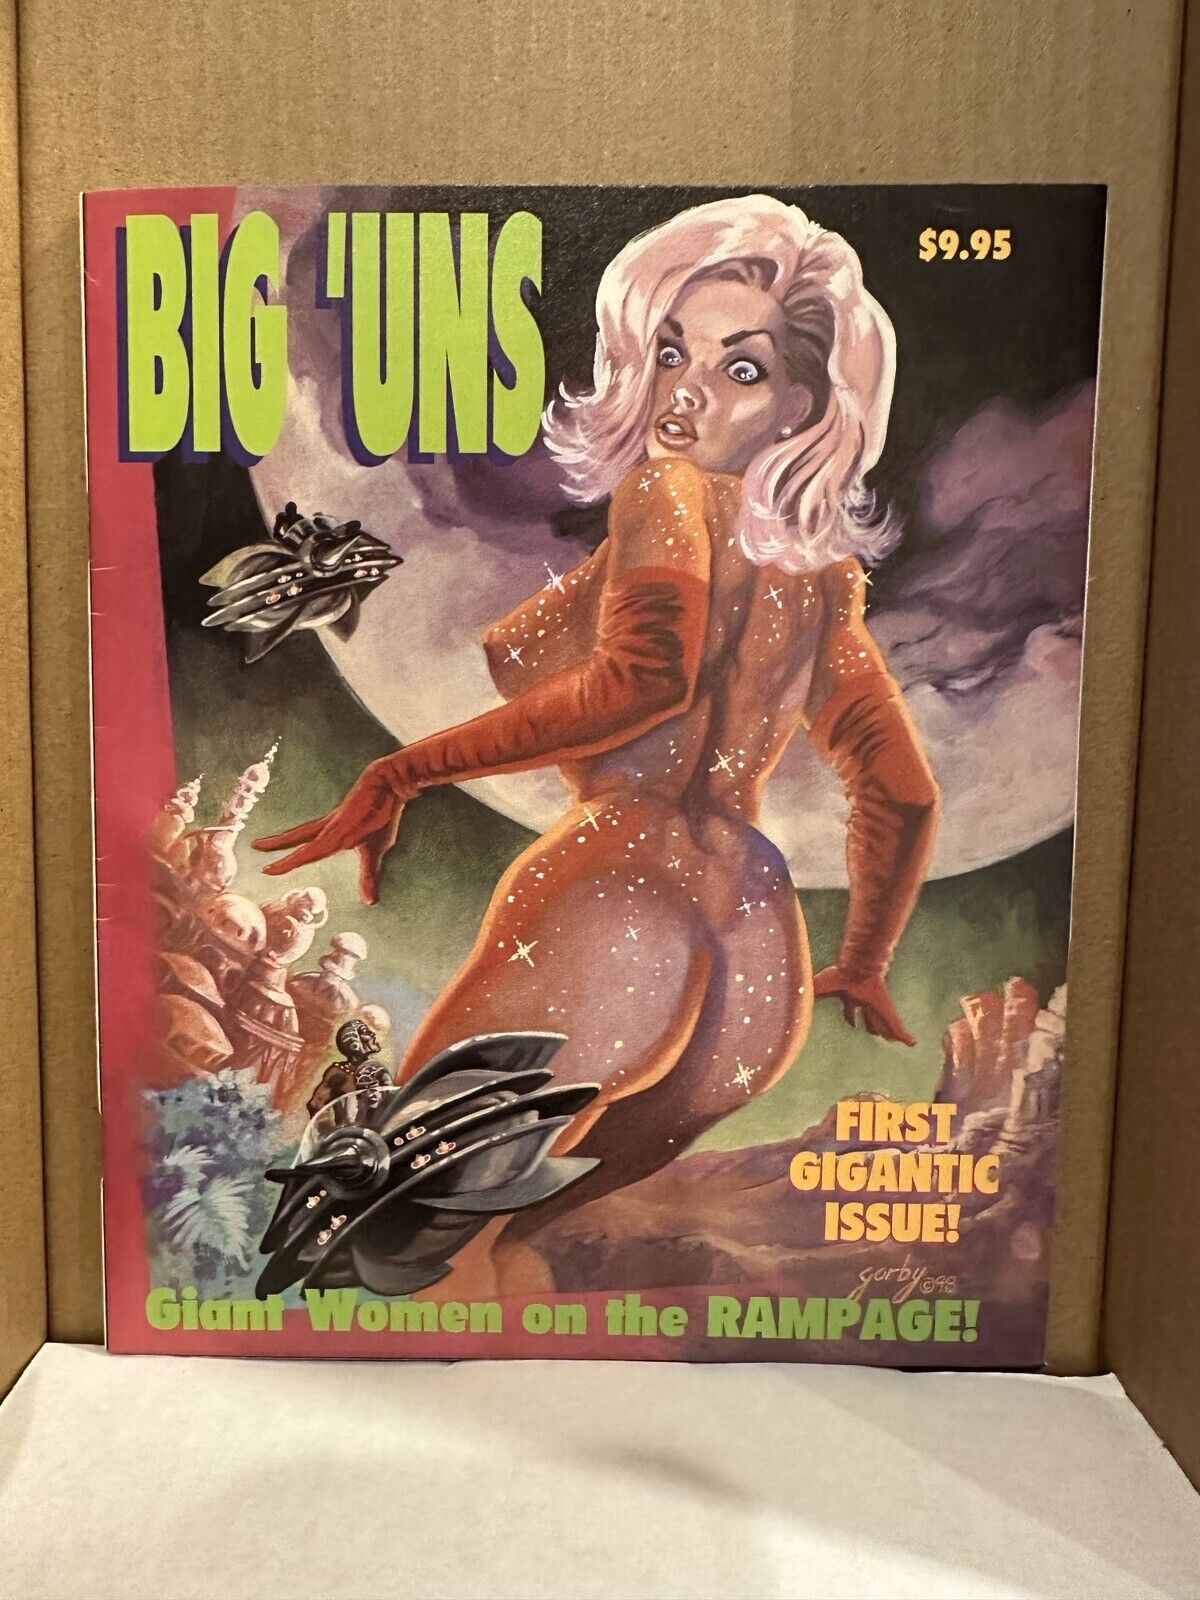 Big 'Uns #1 Giant Women on the Rampage VF+/NM Beautiful Cover, BOOTY Cover